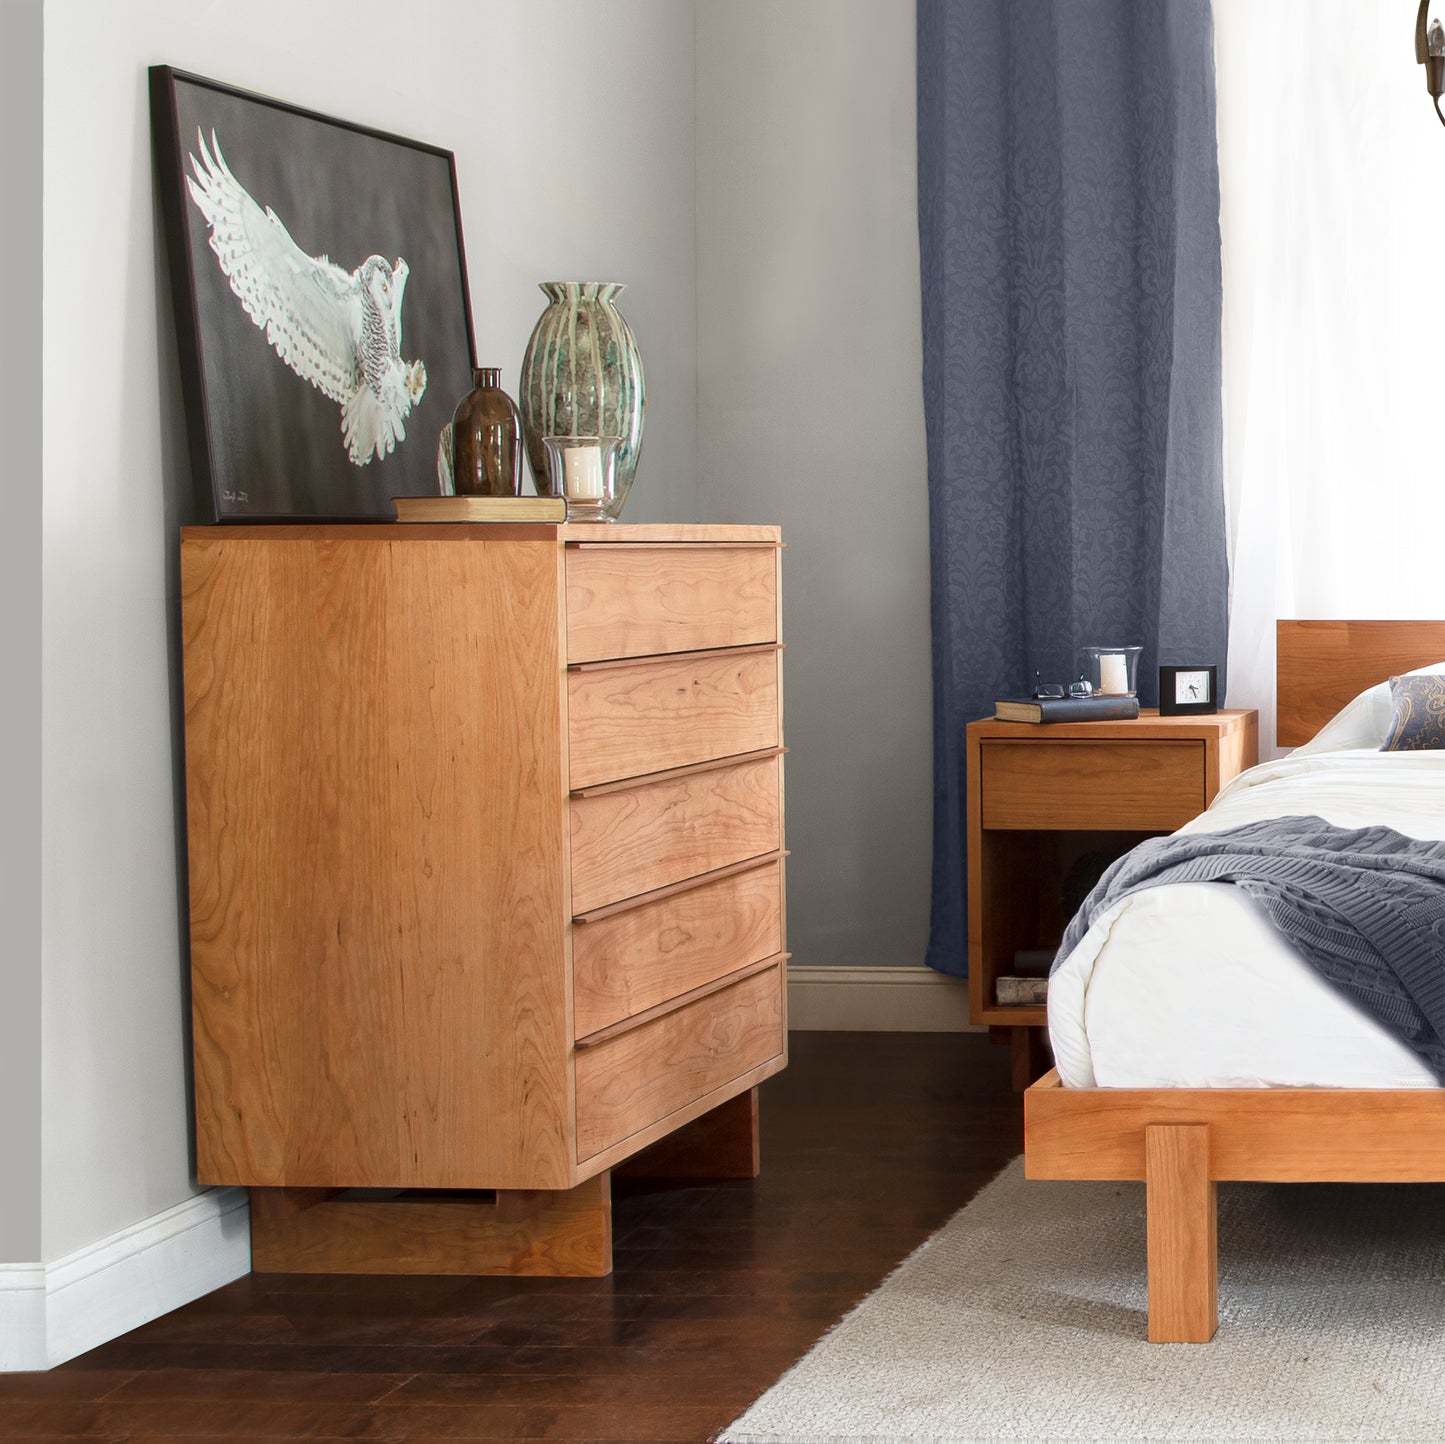 A handcrafted wooden dresser, known as the Vermont Furniture Designs Kipling 5-Drawer Wide Chest, stands in a bedroom with a framed artwork above it, next to a window draped with blue curtains.